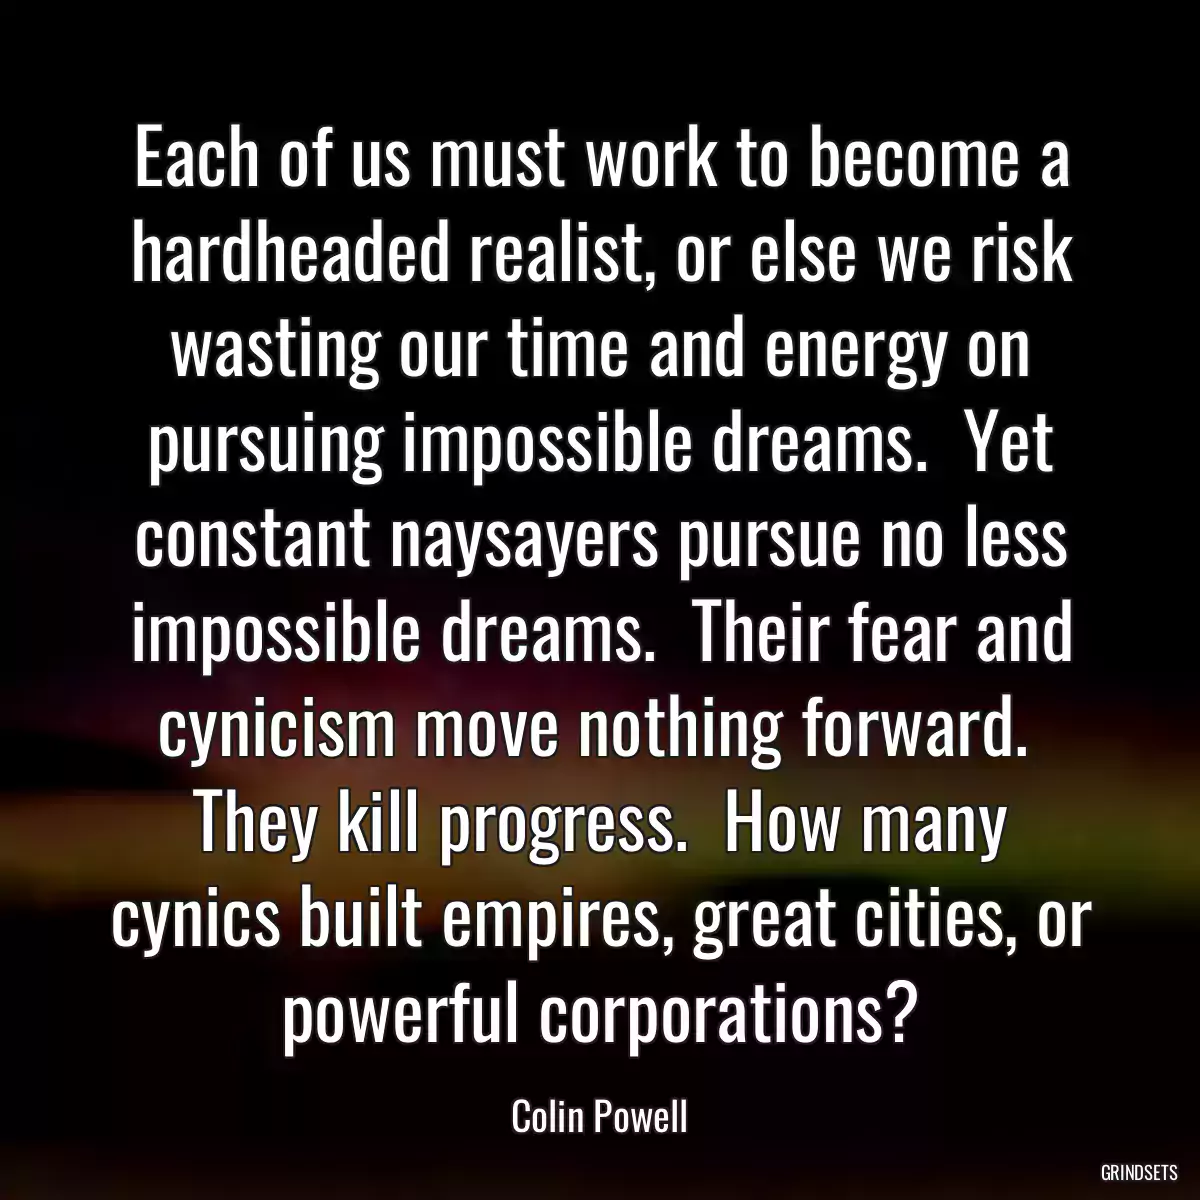 Each of us must work to become a hardheaded realist, or else we risk wasting our time and energy on pursuing impossible dreams.  Yet constant naysayers pursue no less impossible dreams.  Their fear and cynicism move nothing forward.  They kill progress.  How many cynics built empires, great cities, or powerful corporations?